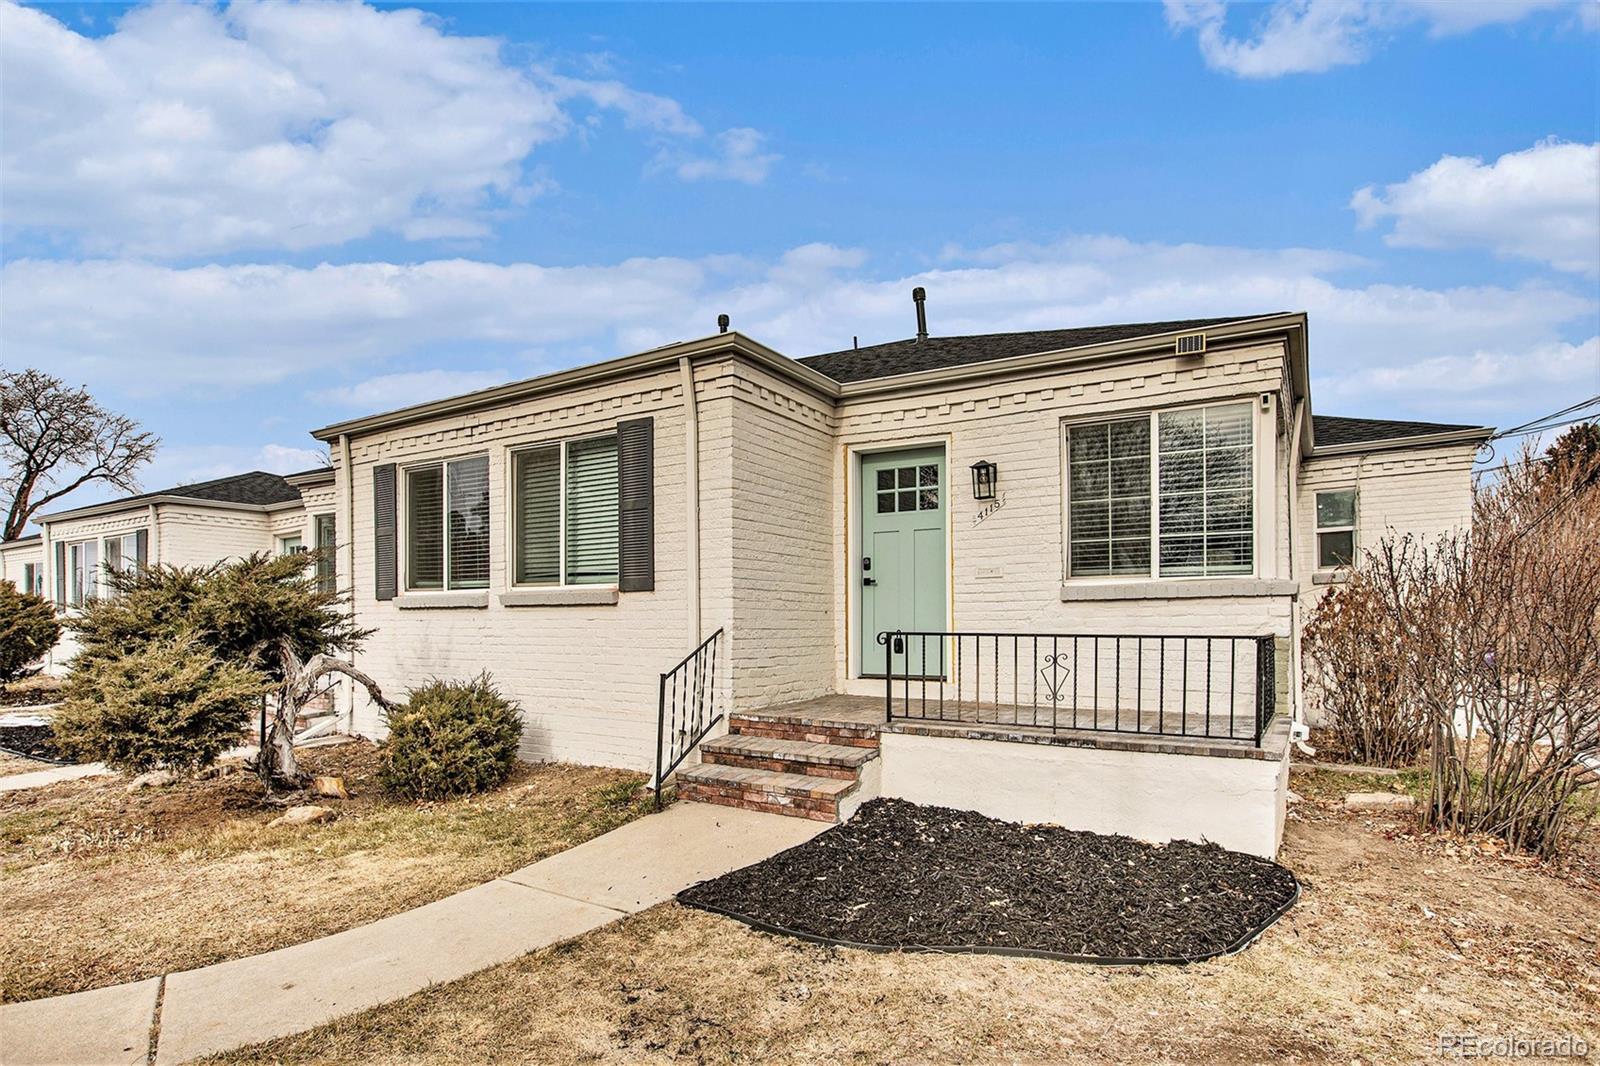 4115 e martin luther king jr. boulevard, denver sold home. Closed on 2024-05-15 for $397,500.